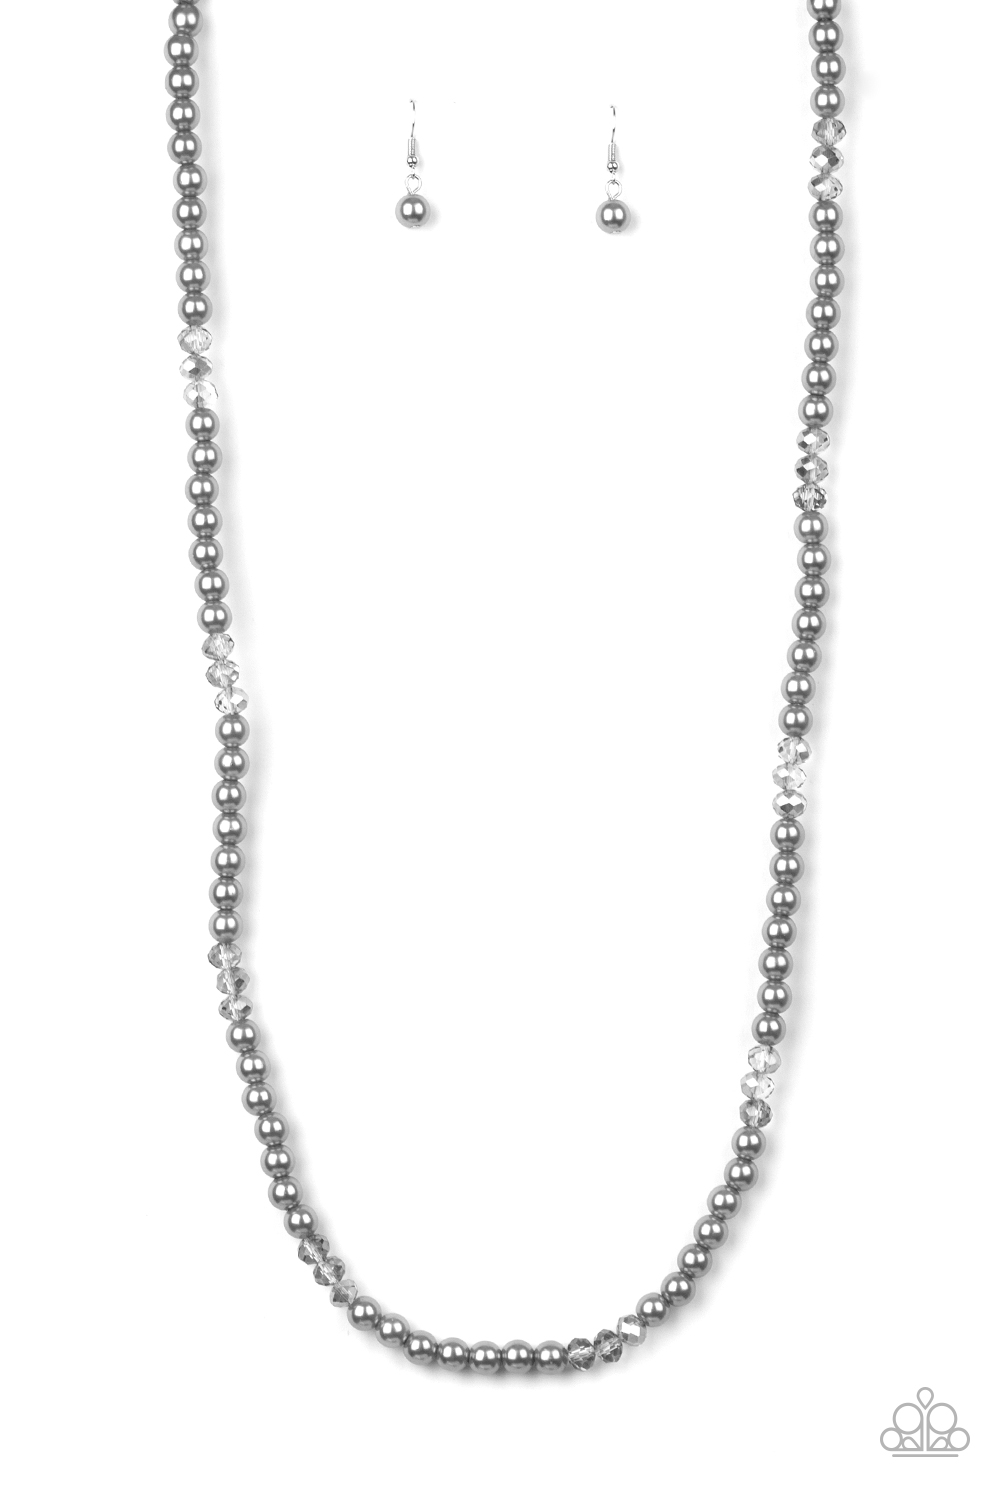 Necklace - Girls Have More FUNDS - Silver